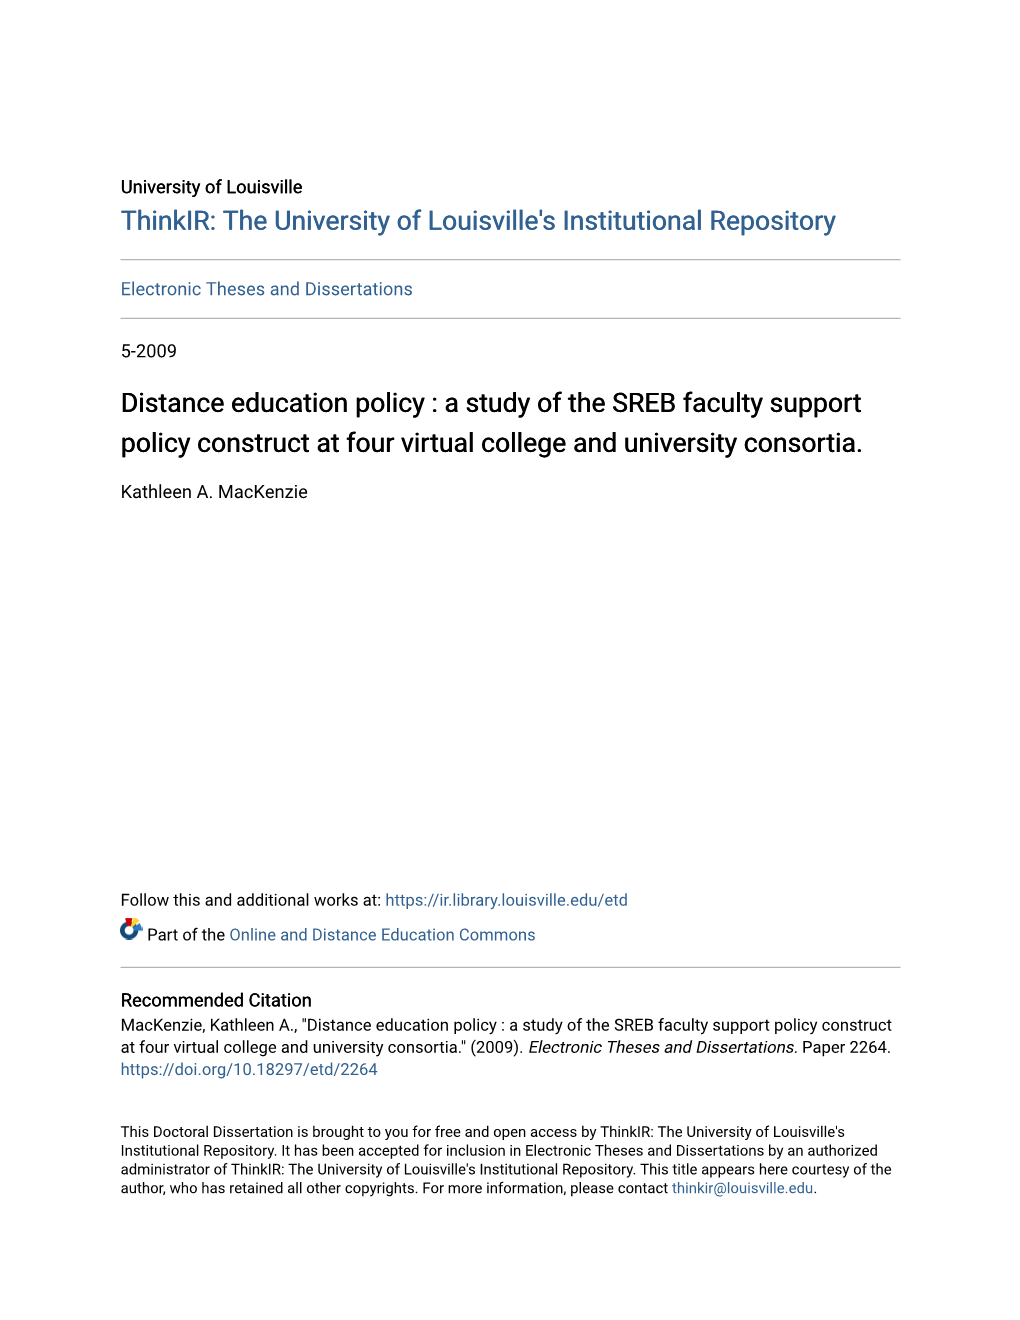 Distance Education Policy : a Study of the SREB Faculty Support Policy Construct at Four Virtual College and University Consortia